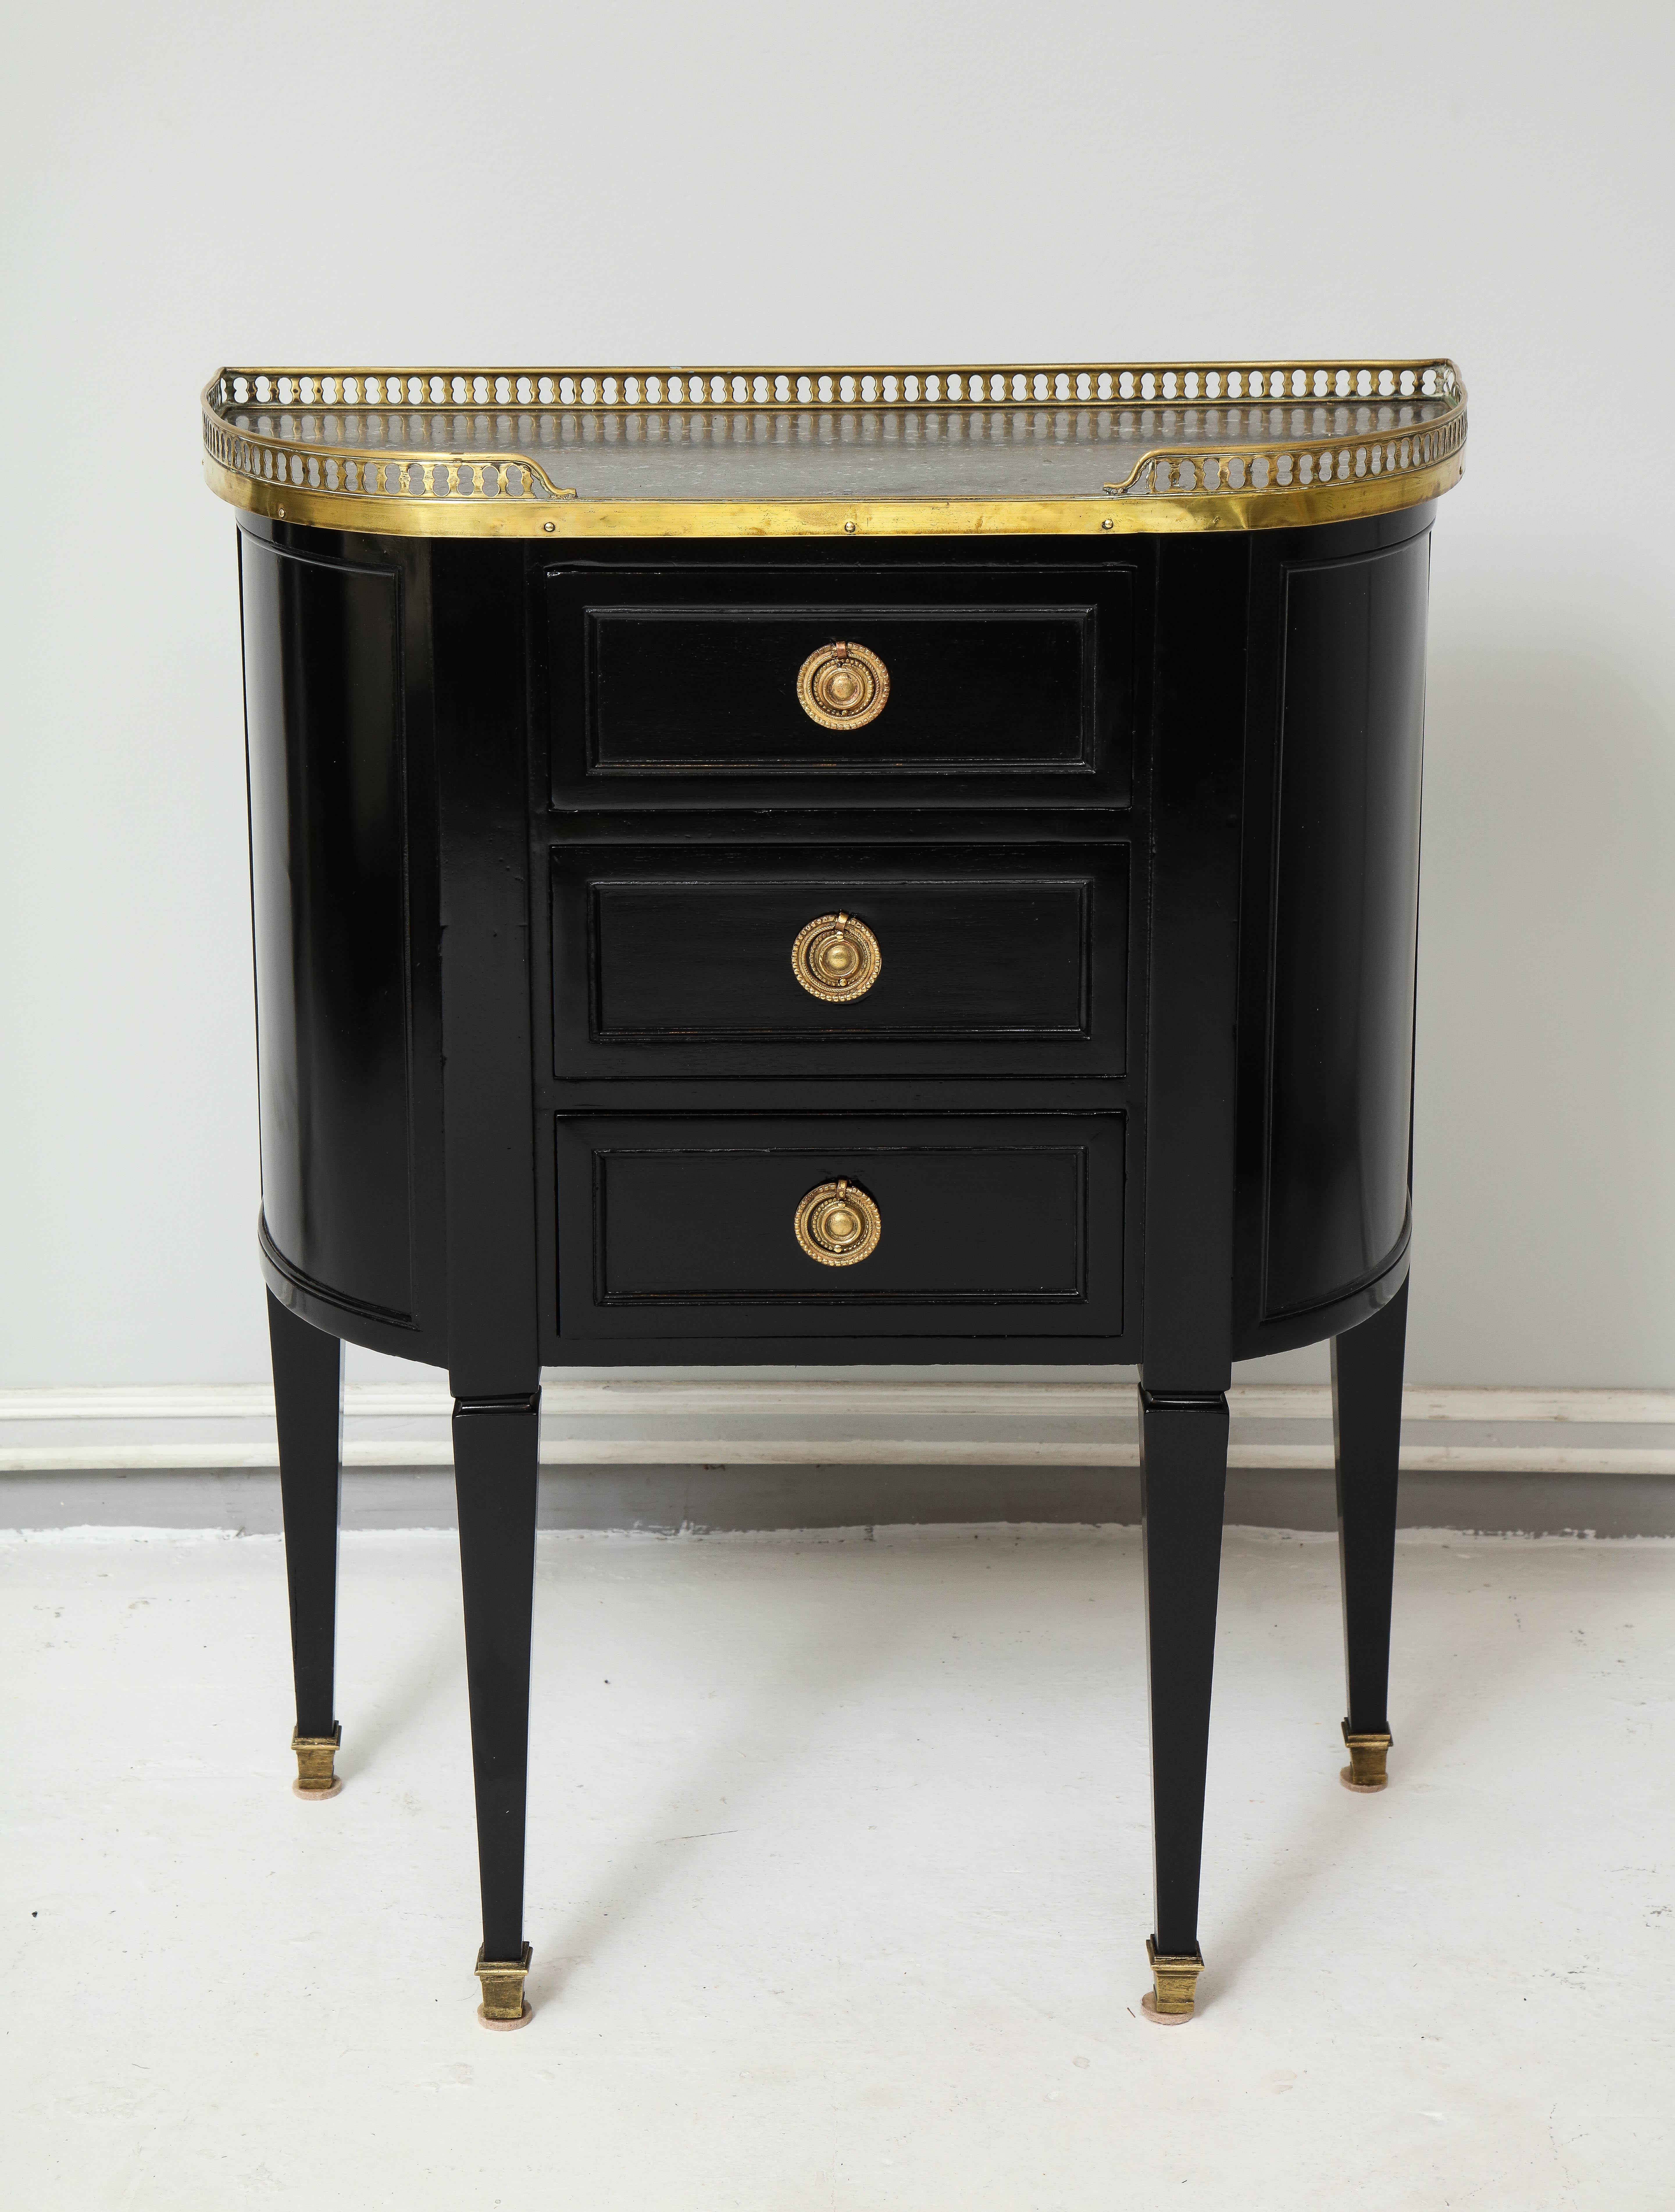 Pair of ebonized French marble-top petite commodes with brass gallery and pull-out drawers.